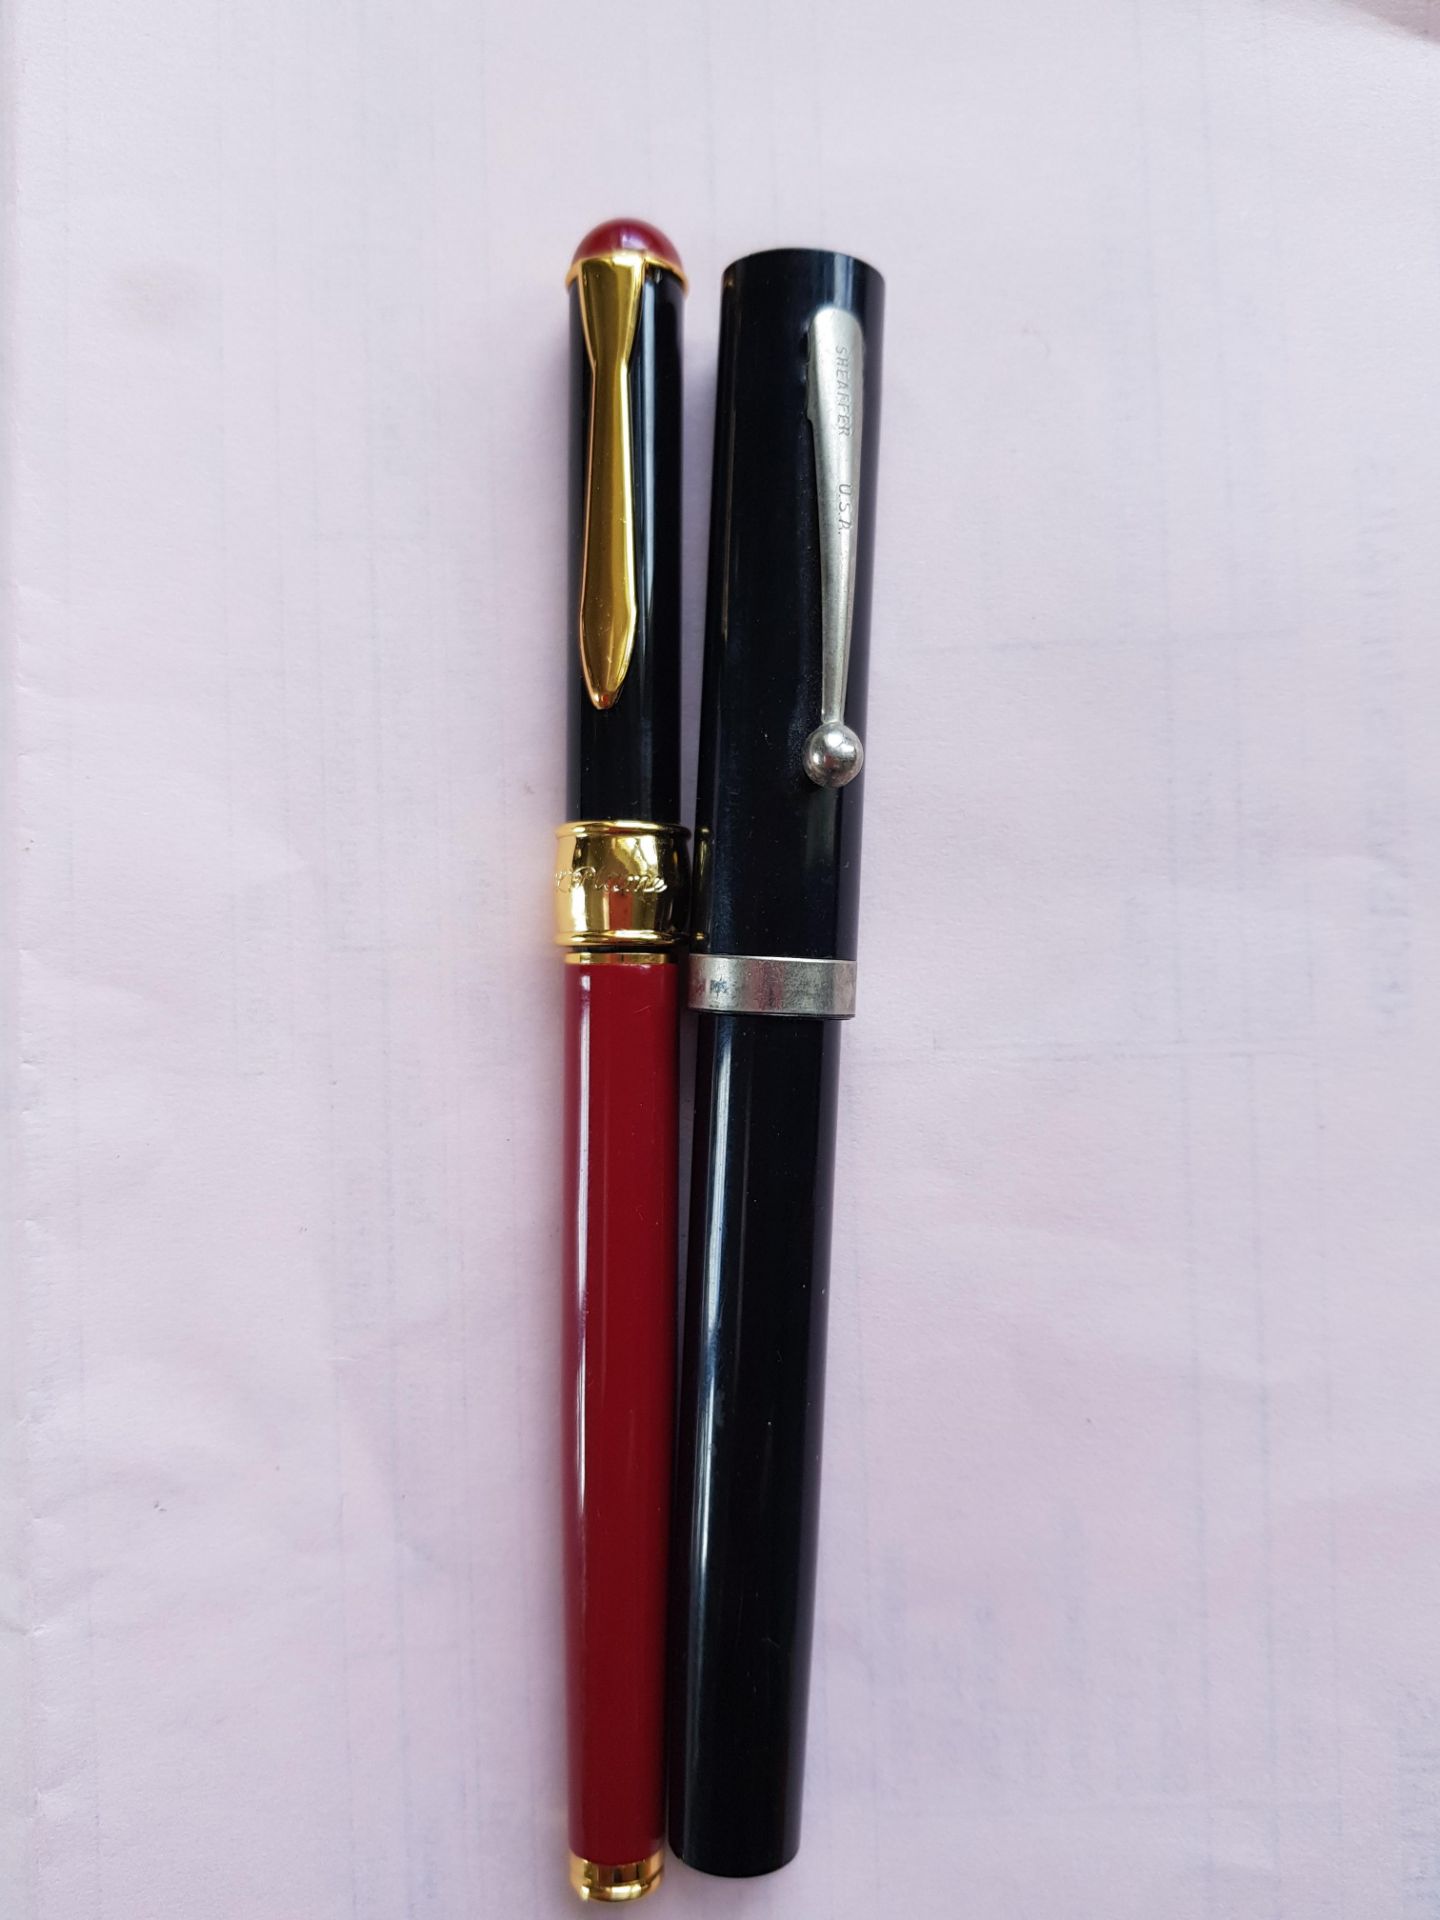 Sheaffer and L'Plume Fountain Pens - Image 2 of 2